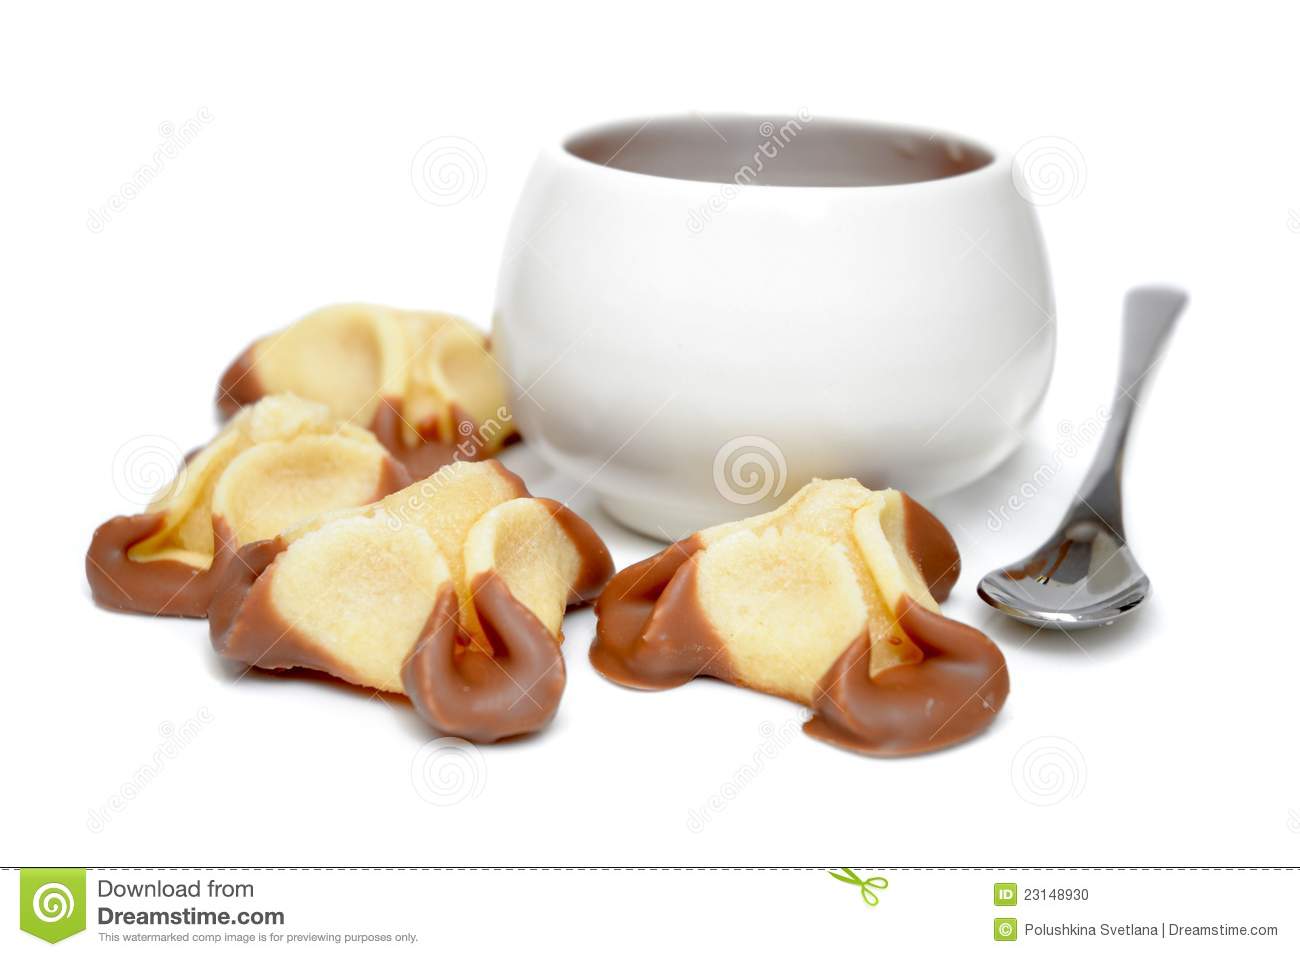 Dessert And Cup Of Coffee Stock Photo   Image  23148930